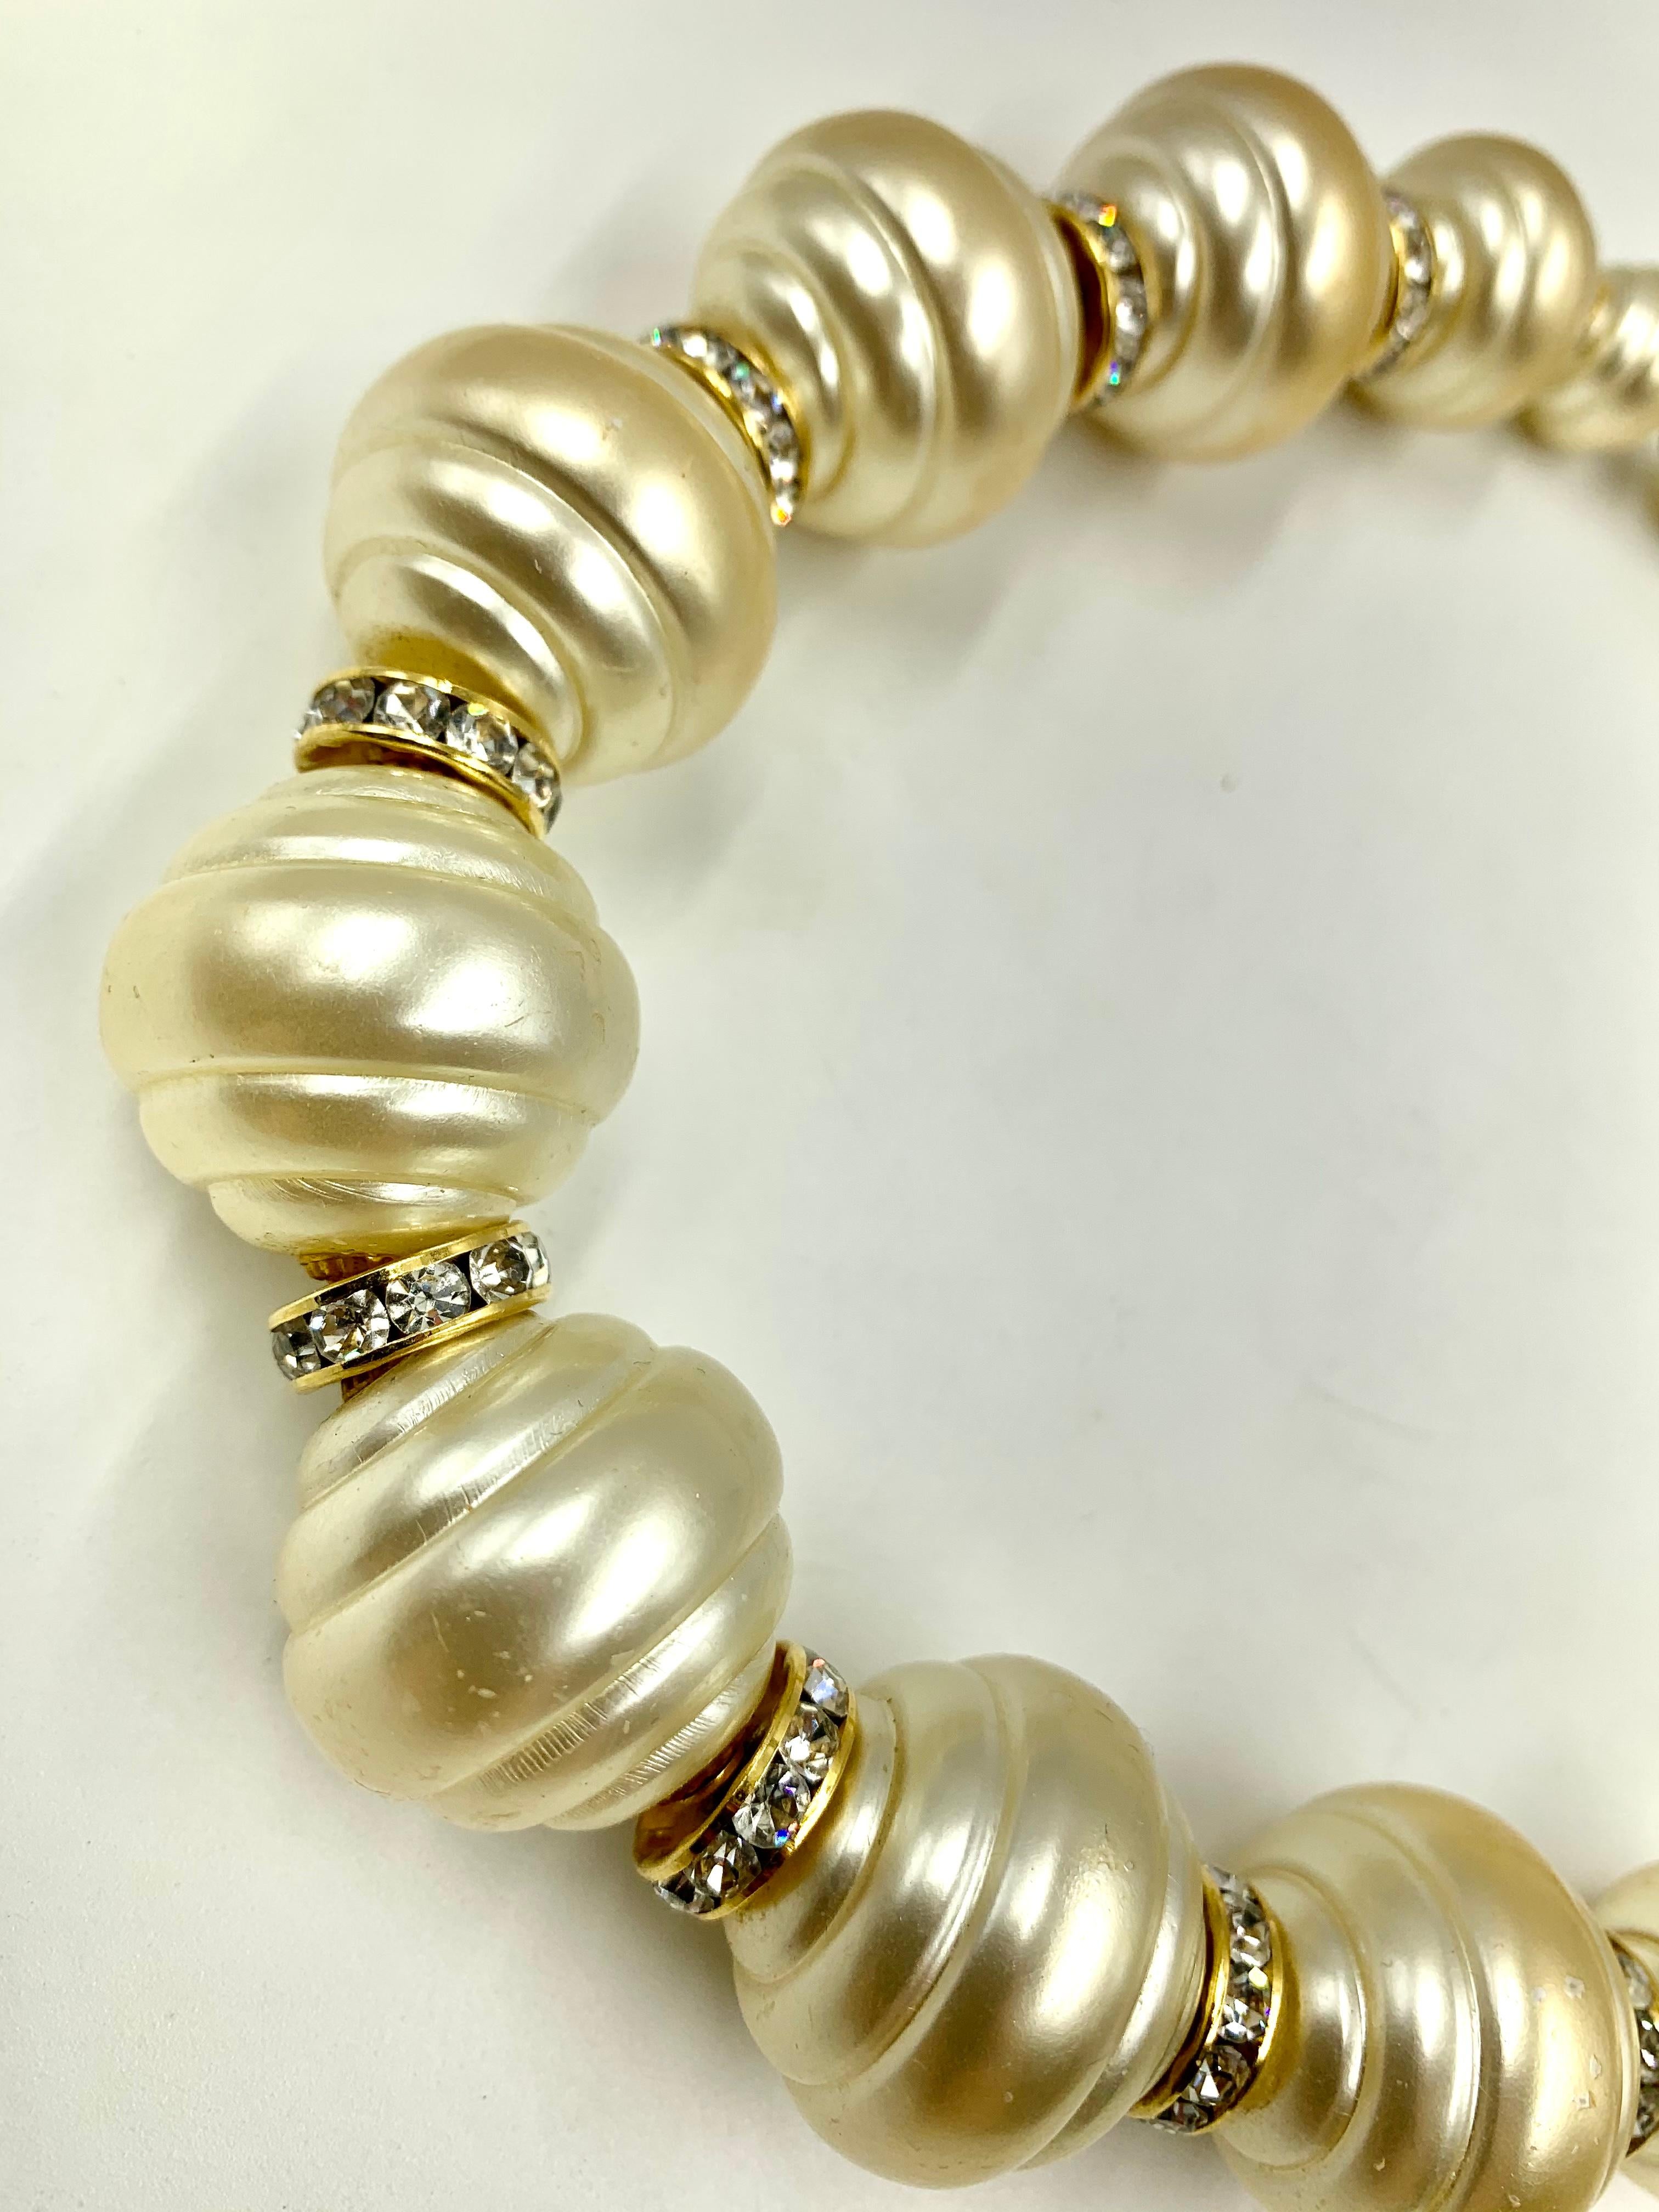 Striking oversize vintage 1980's Valentino faux pearl necklace with crystal spacers
Signed Valentino, Made Italy
Large pearls 25mm by 23mm, smaller pearls 15mm by 15mm
Good condition commensurate with age, normal surface wear